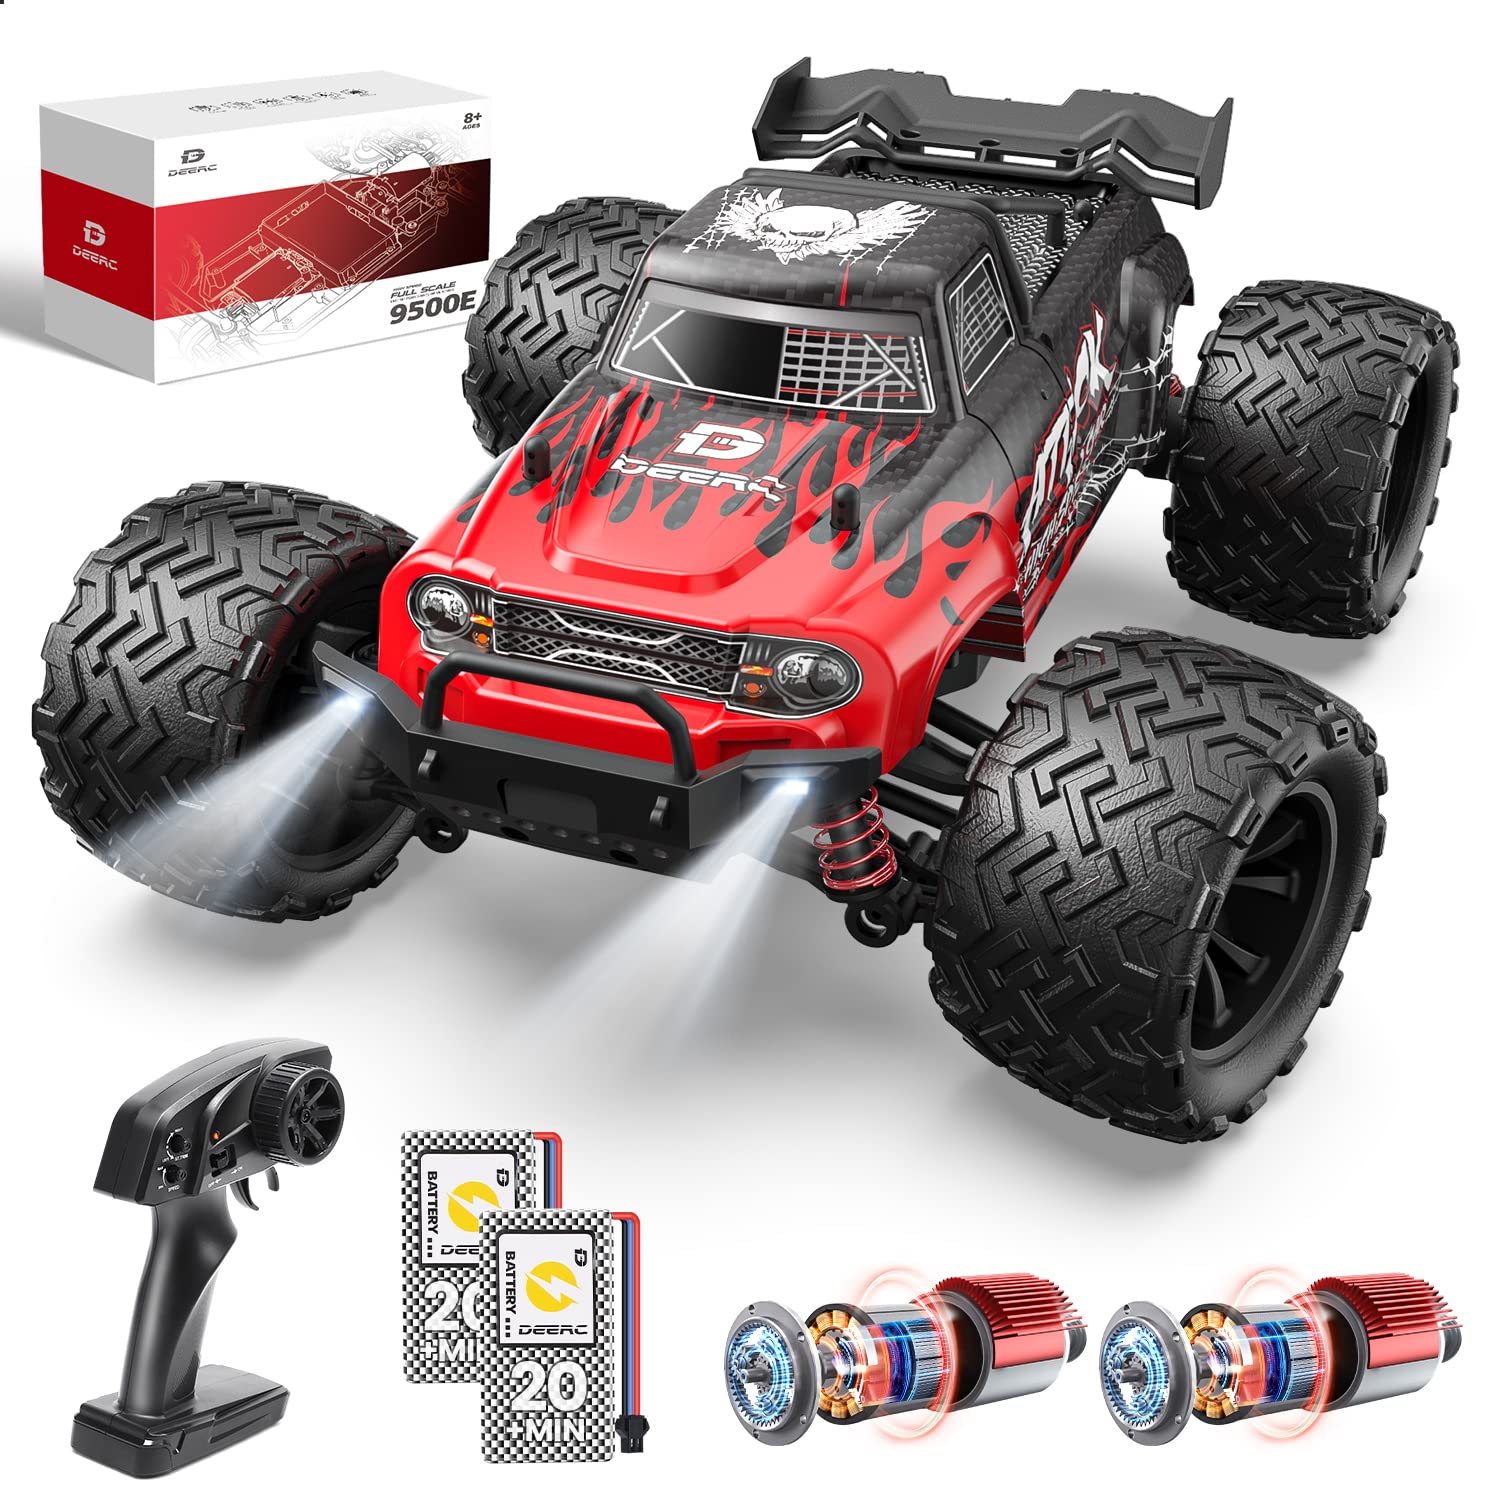 The 11 Best Remote Control Trucks in 2023 - RC Trucks for Kids & Adults